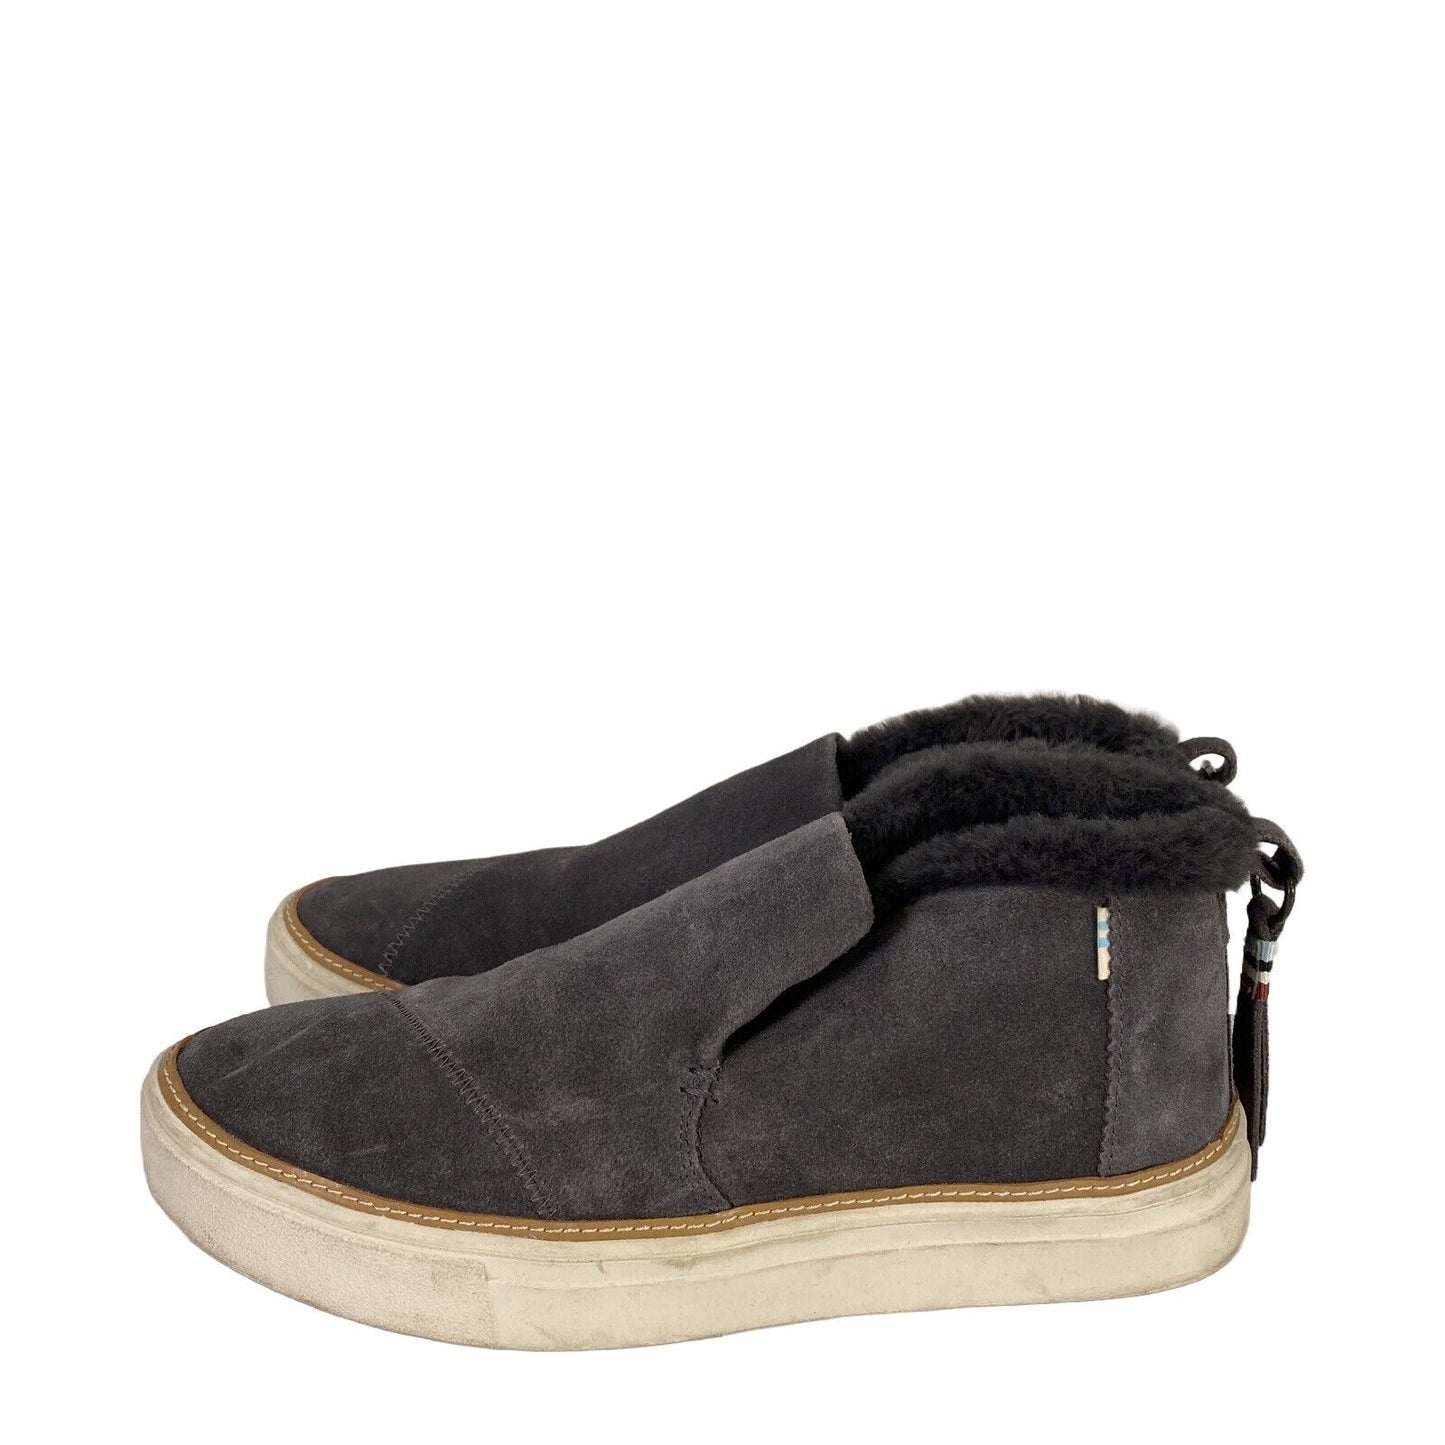 Toms Women's Gray Paxton Suede Slip On Ankle Booties - 8